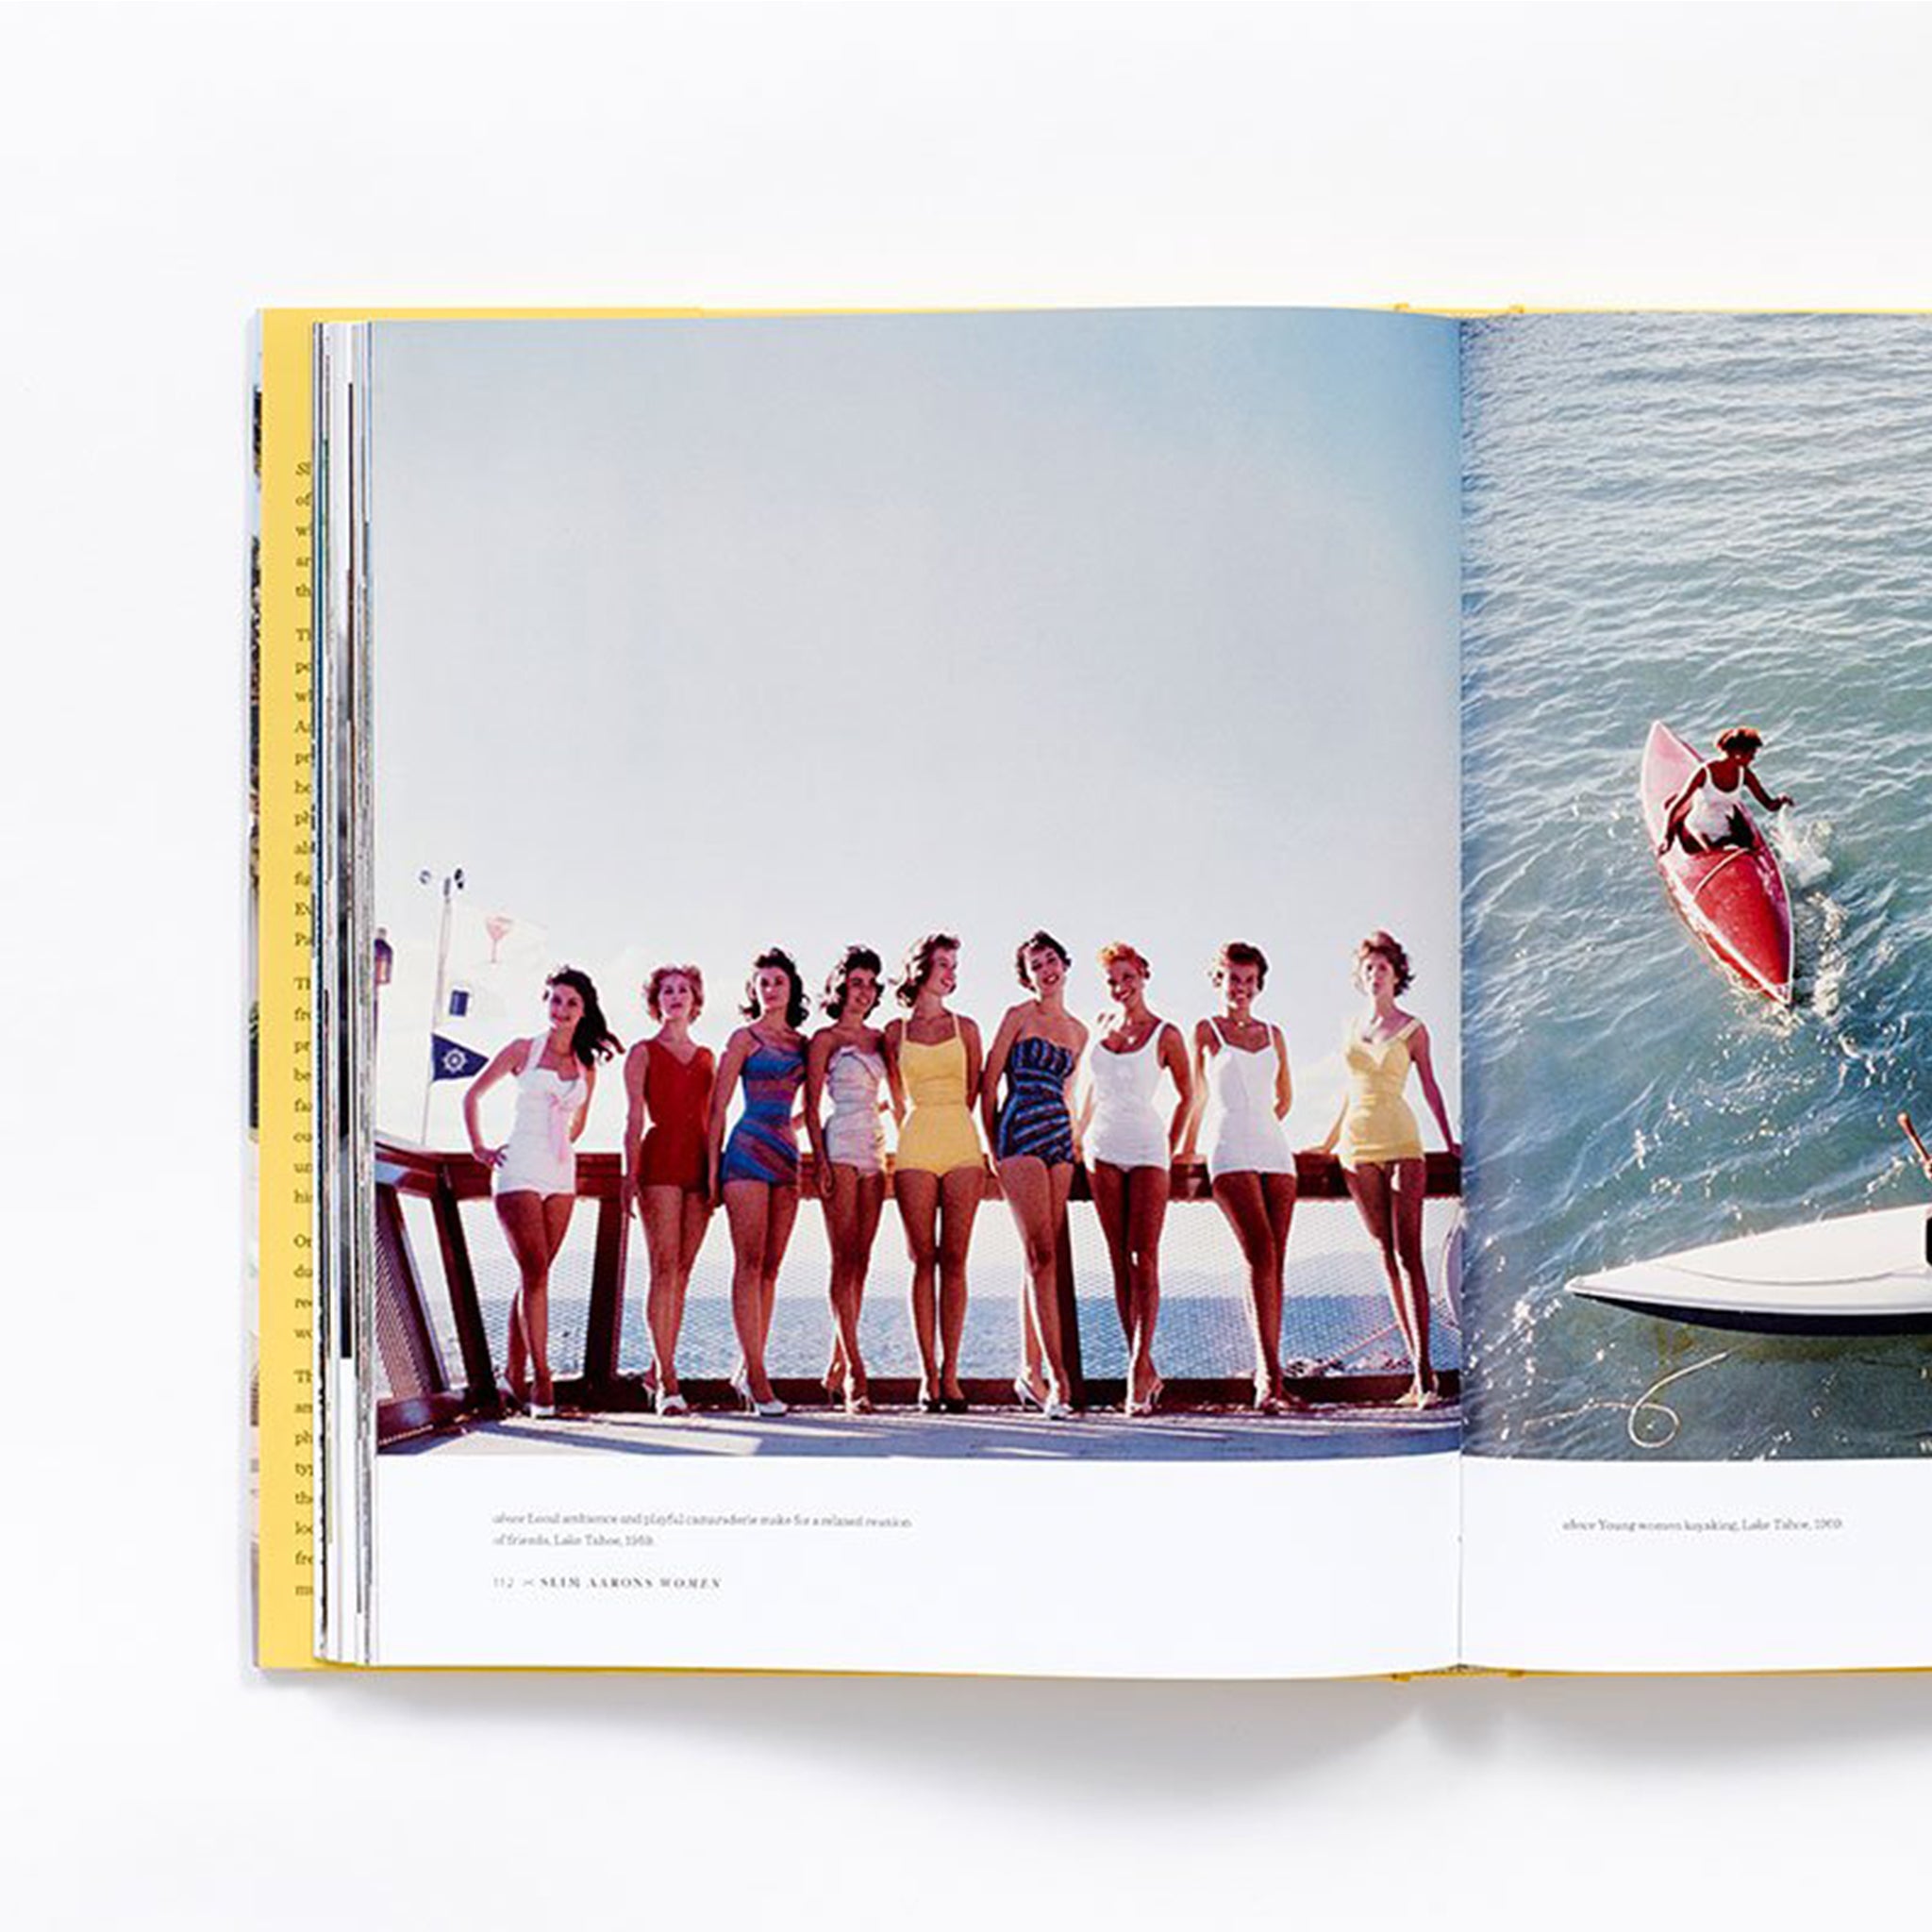 The book open to show the photographs of iconic women inside.